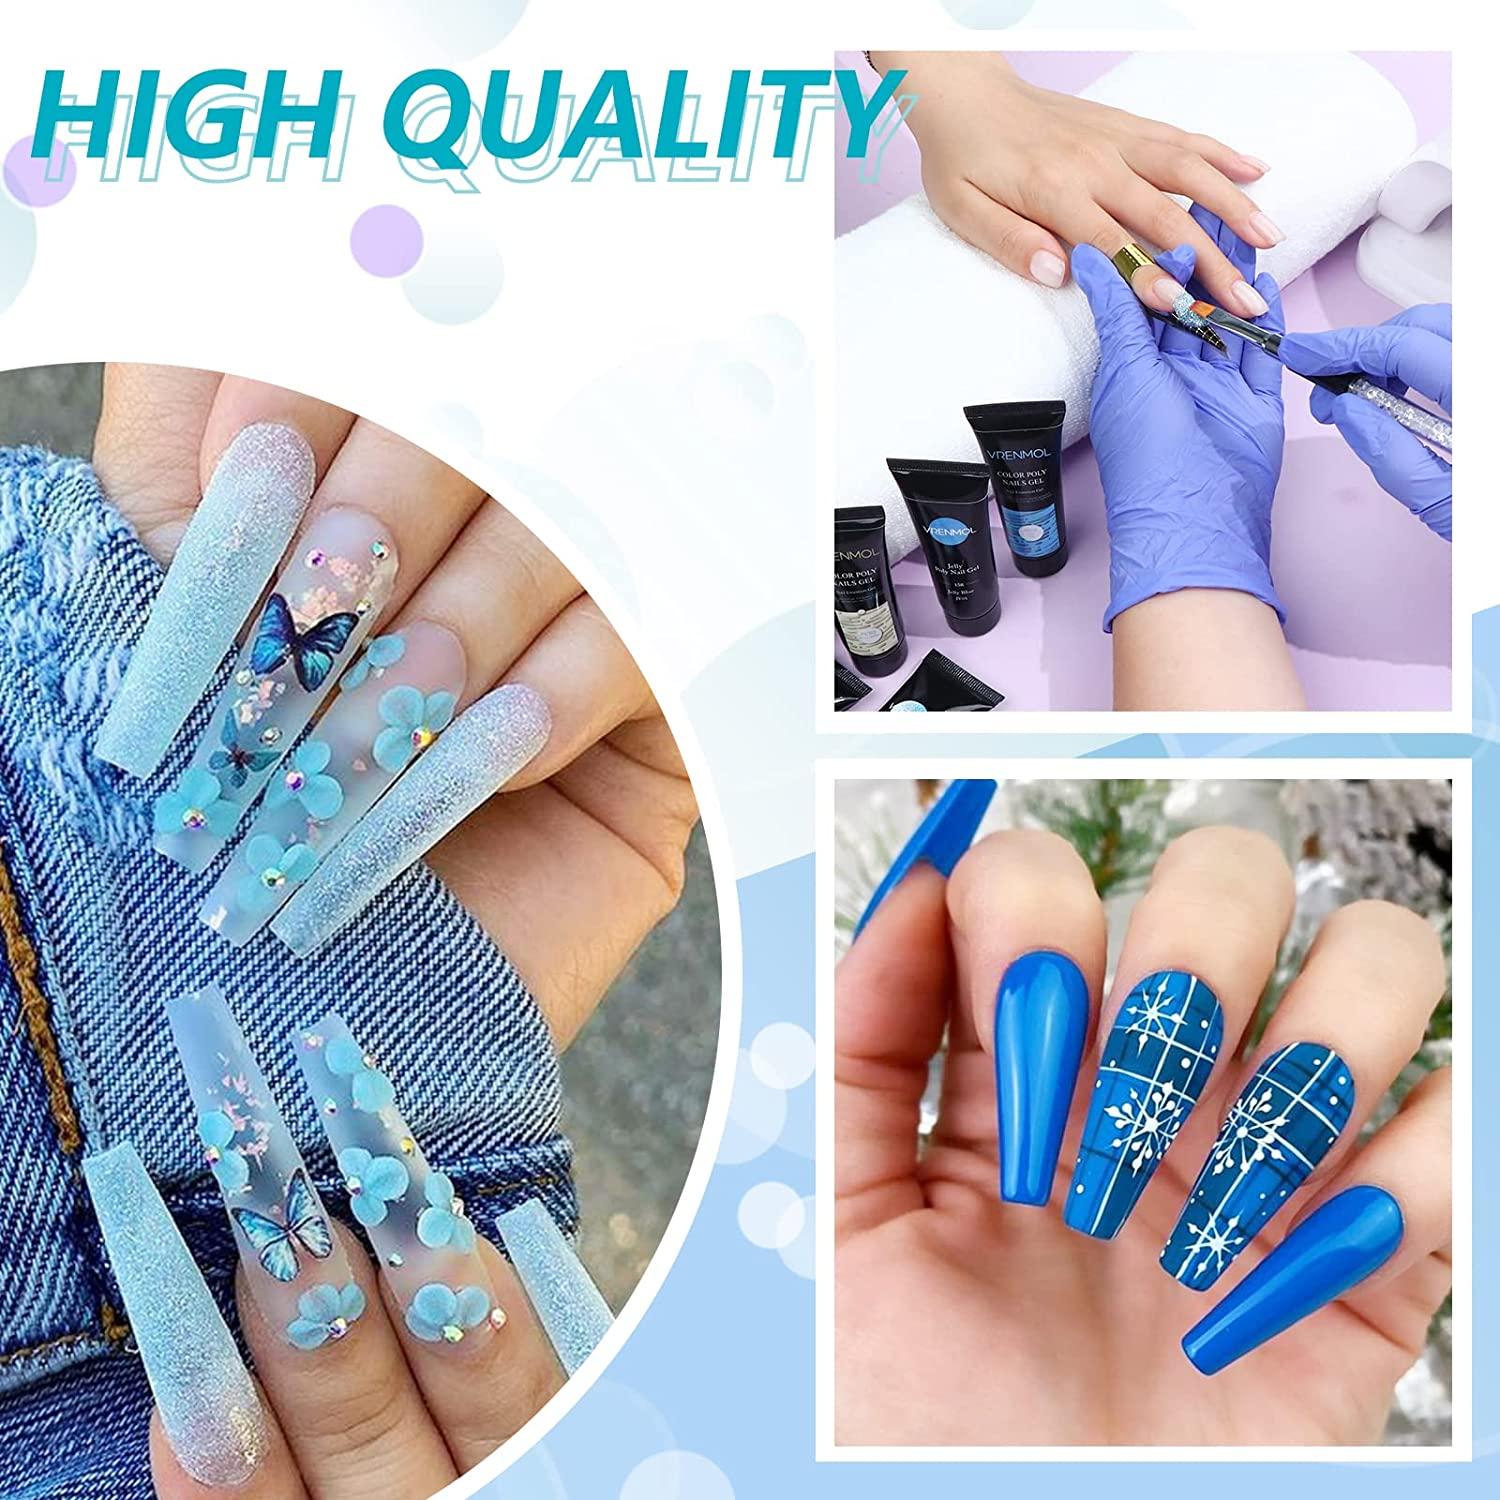 The D nails hub Vadodara - Acrylic nail extension with beautiful pink color  and falling blue color glitter with Swirsky and heavy diamond jewelry look  at-New D Nails Hub_vadodara #nails #naiartclub #longnails💅 #